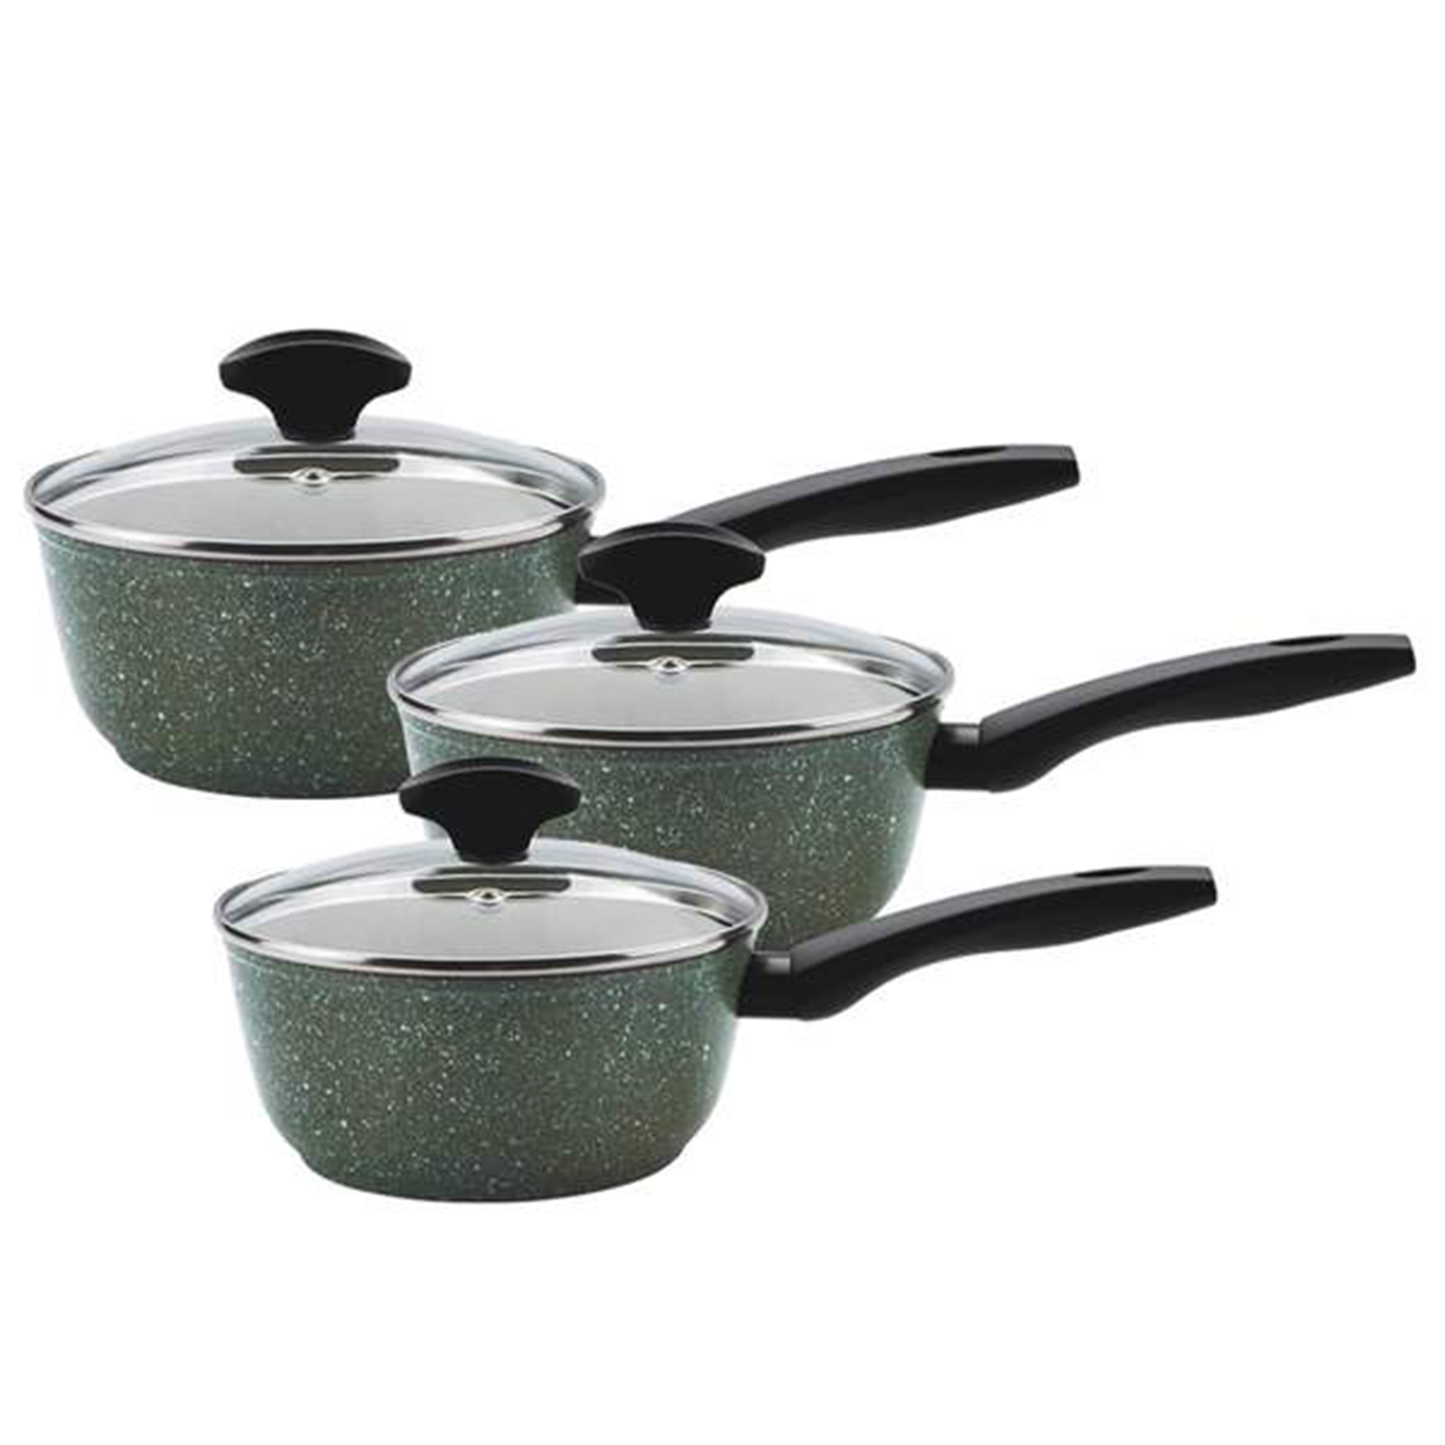 three green pans with glass lids and black handles